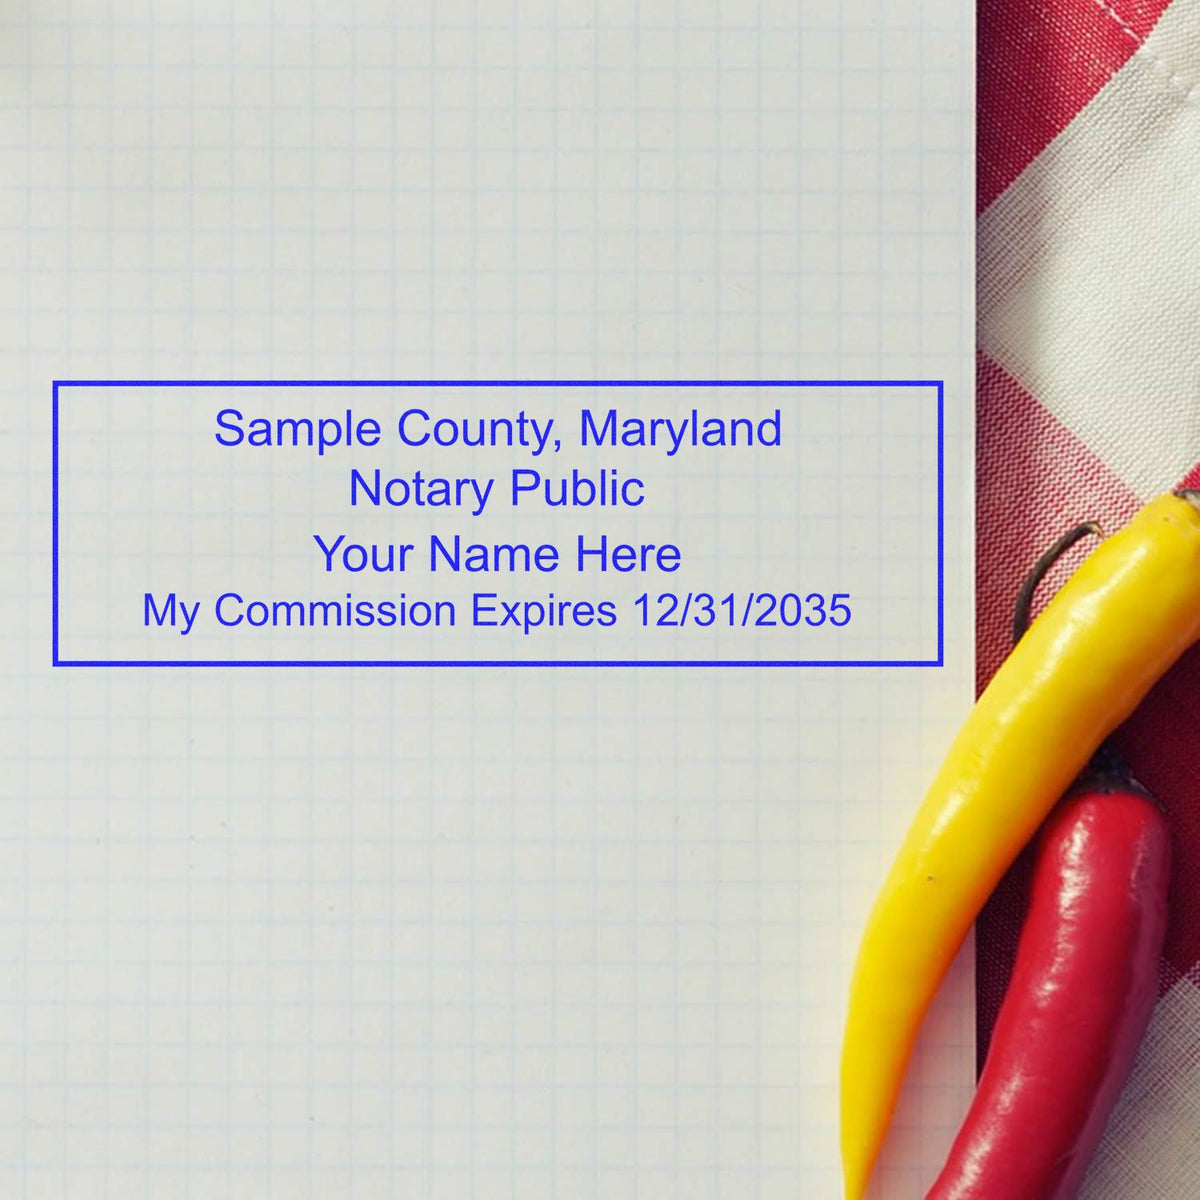 A lifestyle photo showing a stamped image of the Wooden Handle Maryland Rectangular Notary Public Stamp on a piece of paper